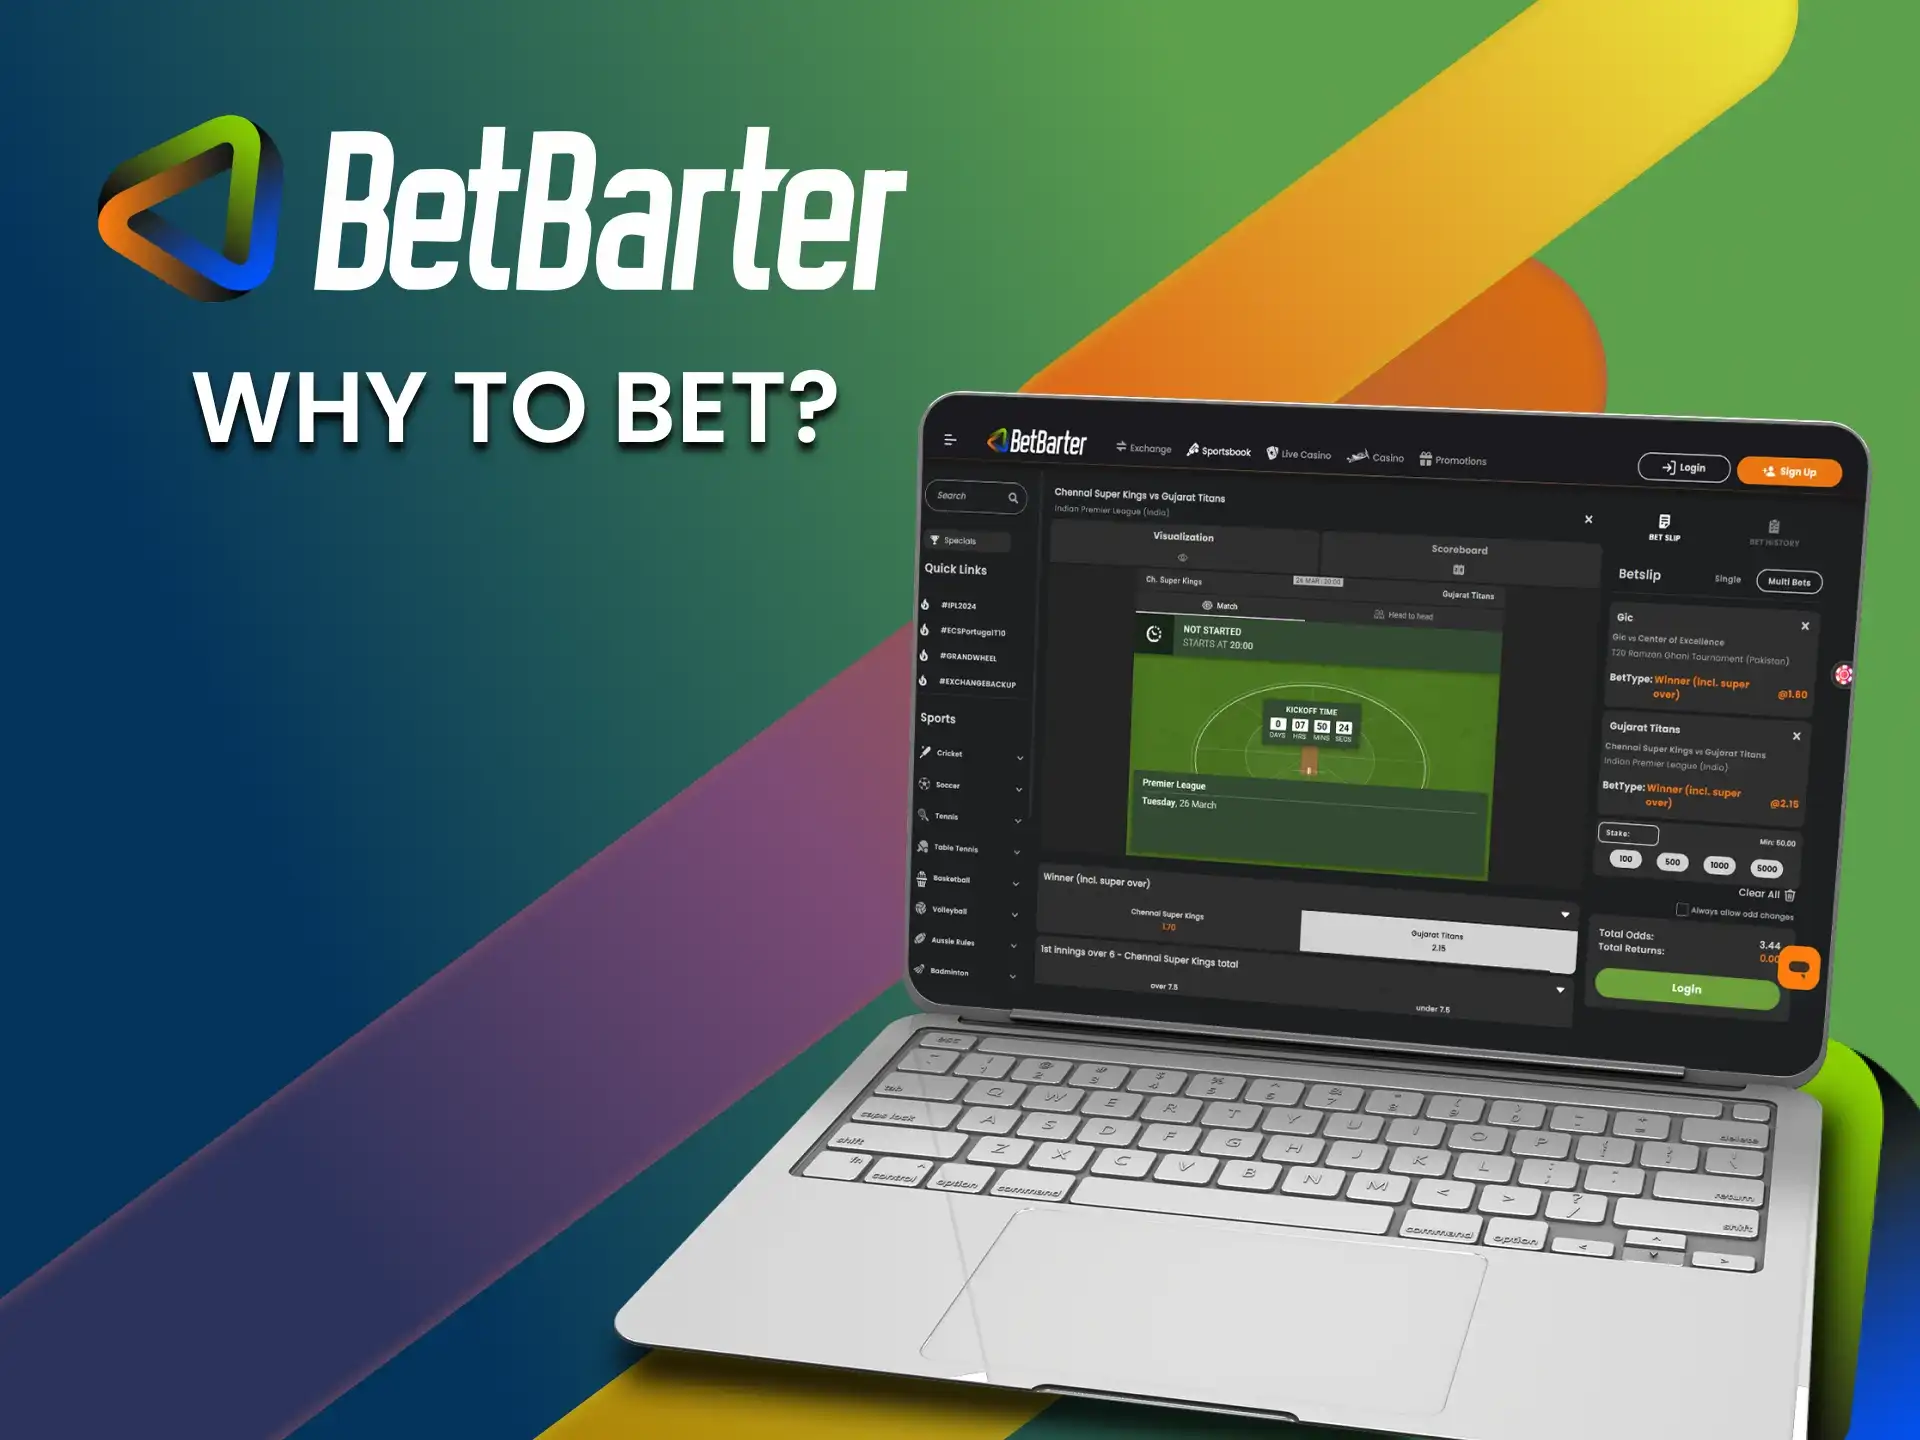 BetBarter online is a cool betting and casino platform that will help you immerse yourself in the world of gambling.